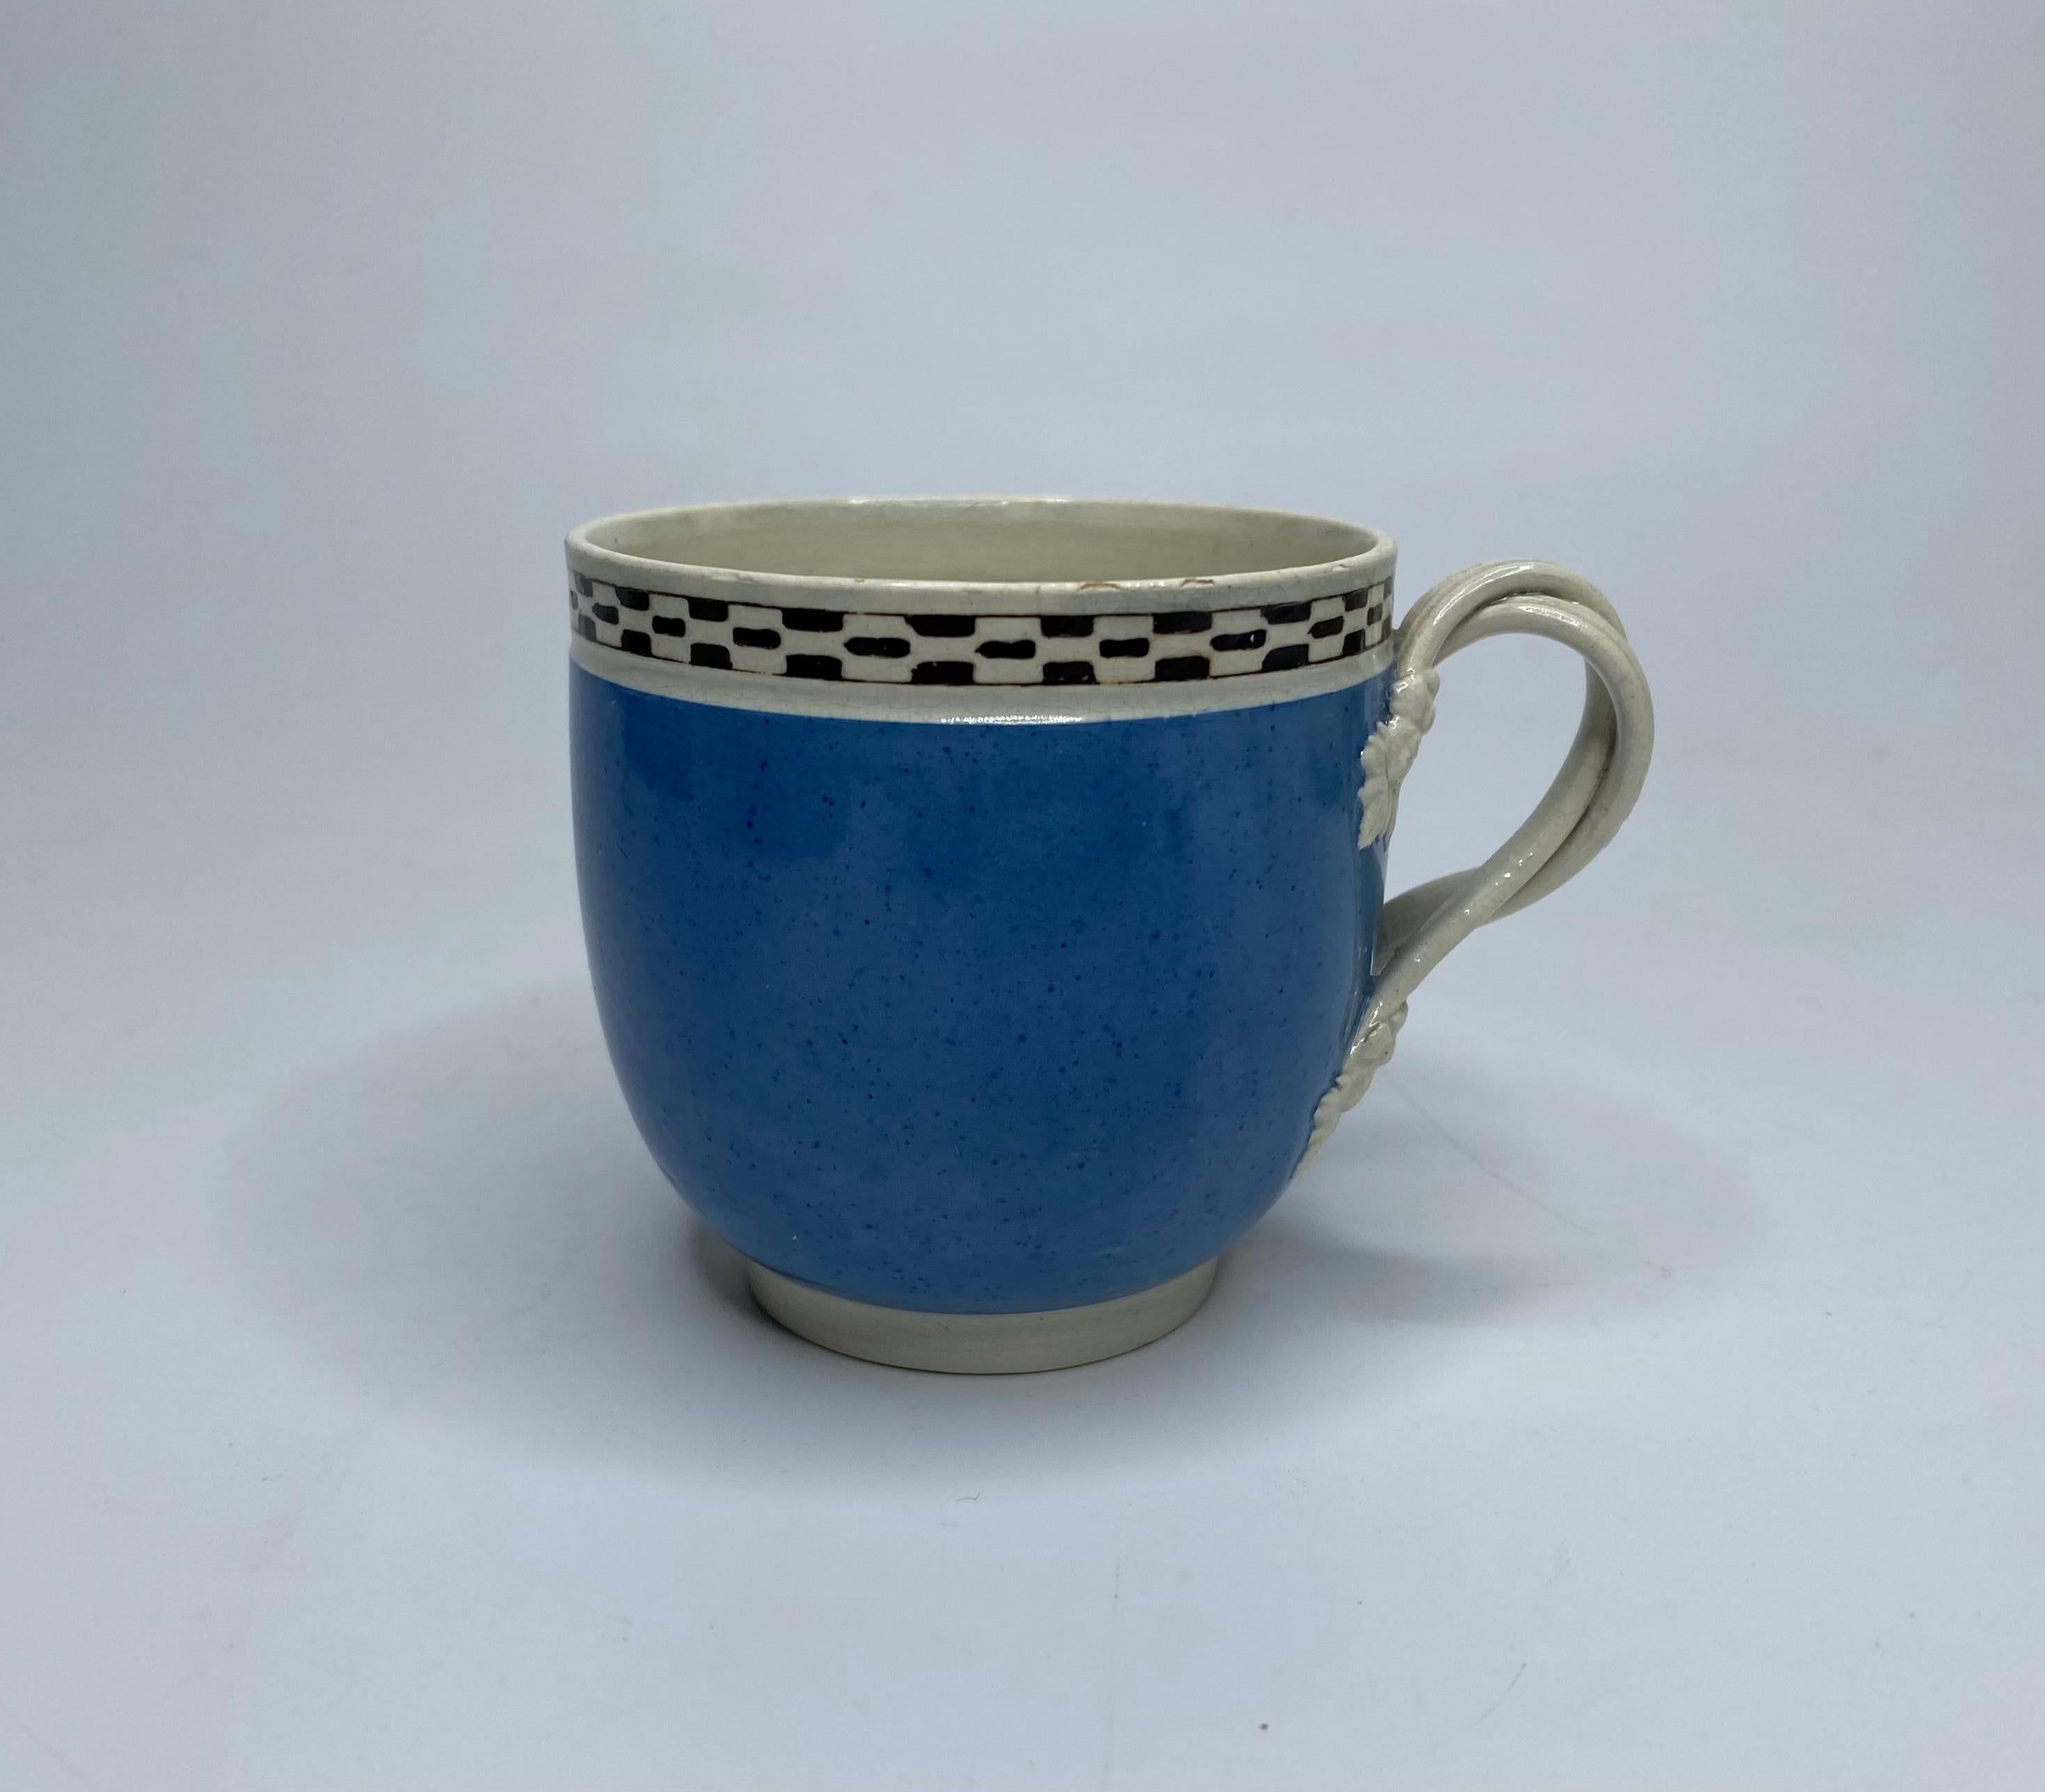 Pearlware Leeds Pottery banded cup and saucer, c. 1790. For Sale